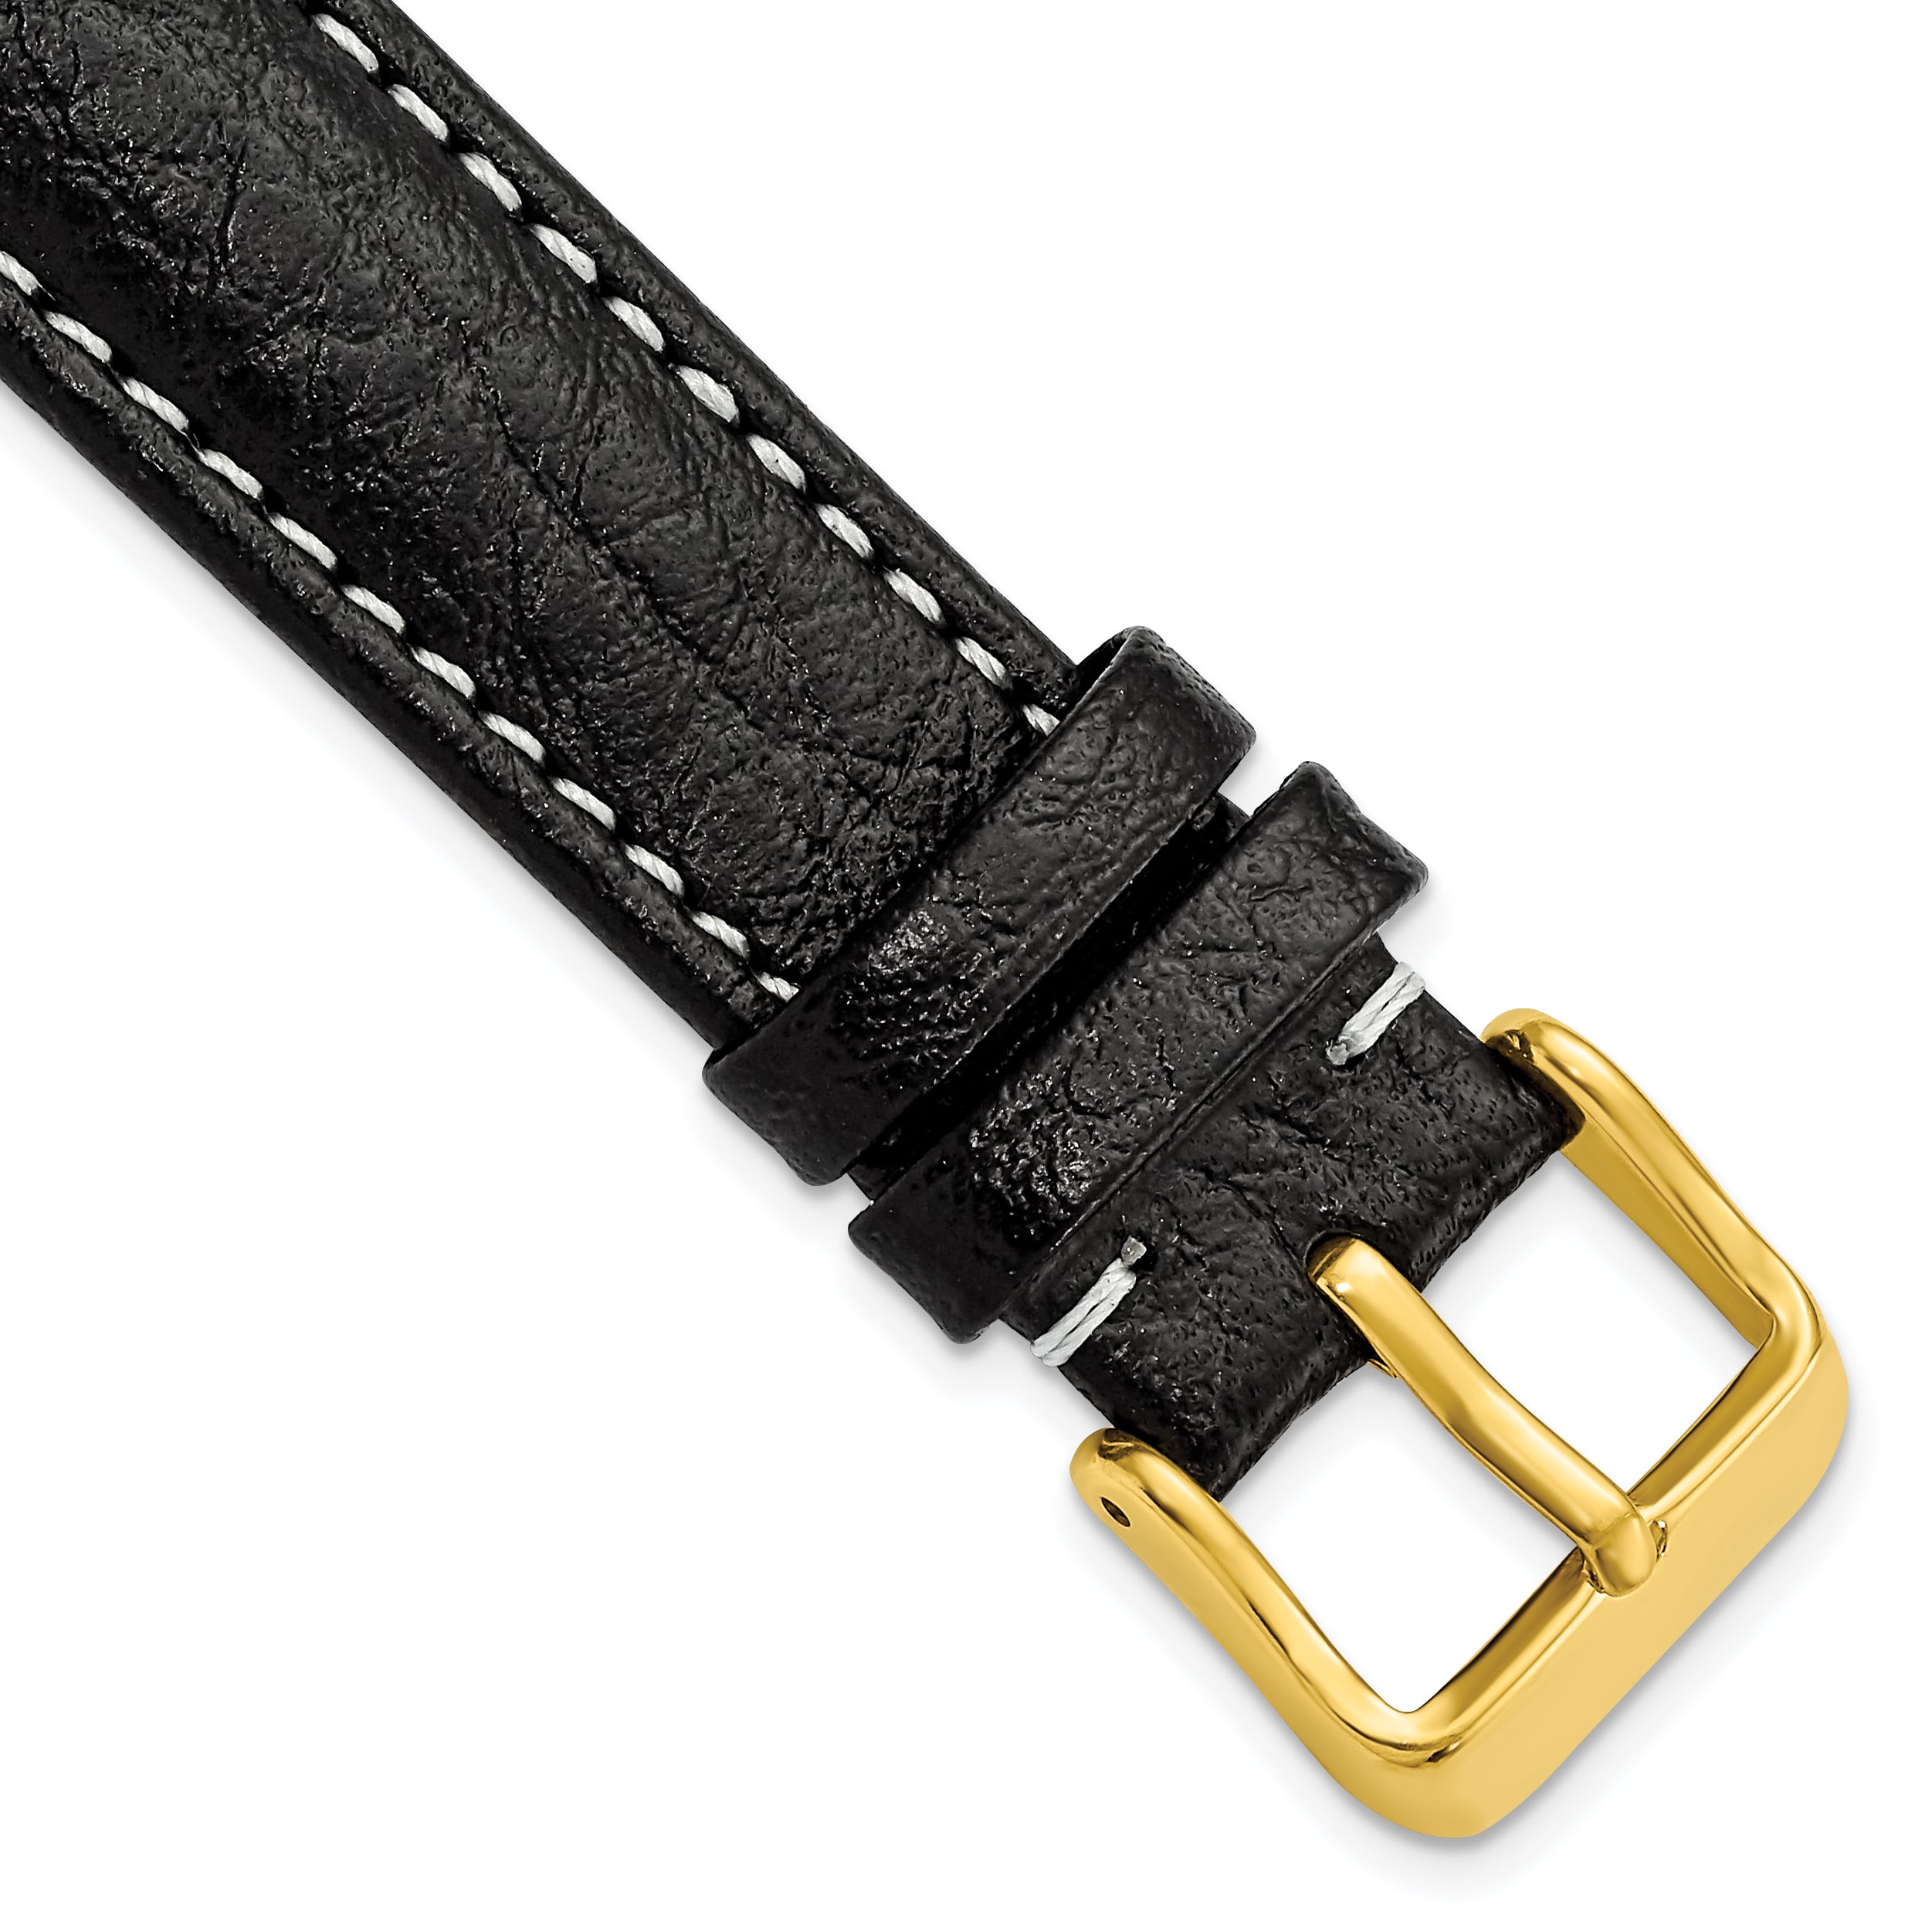 DeBeer 17mm Black Sport Leather with White Stitching and Gold-tone Buckle 7.5 inch Watch Band